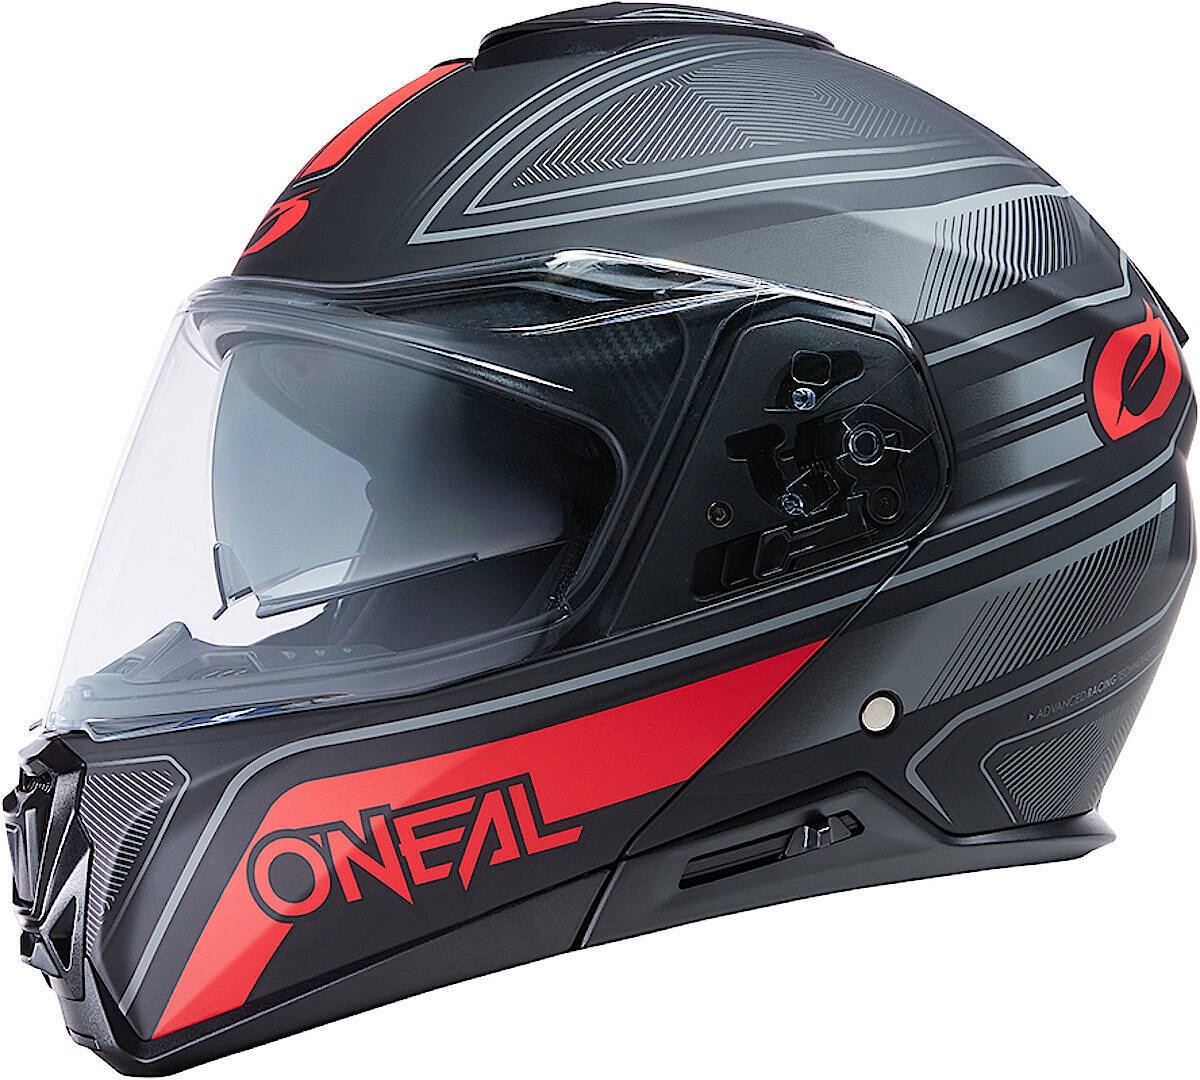 Oneal MSeries String V.22 helm, zwart-rood, XL